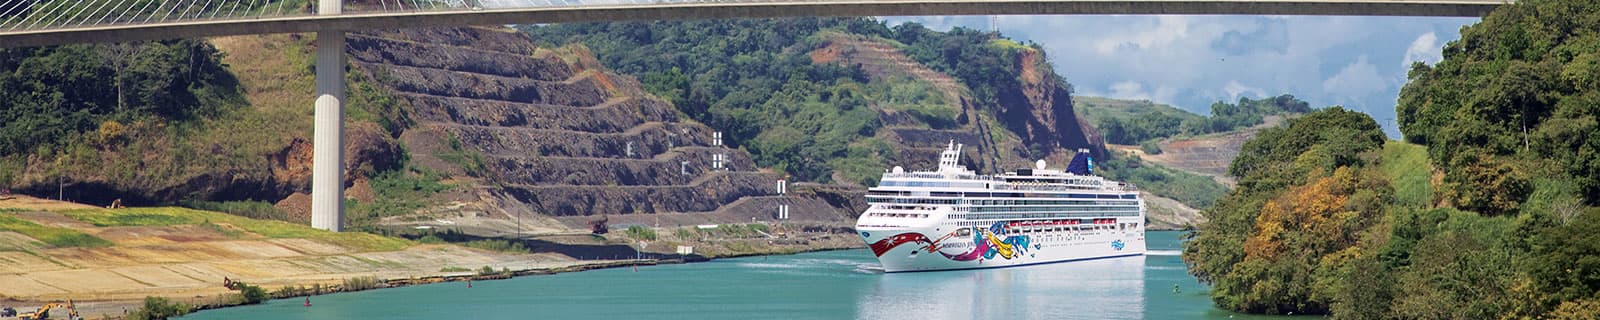 panama canal cruises in july